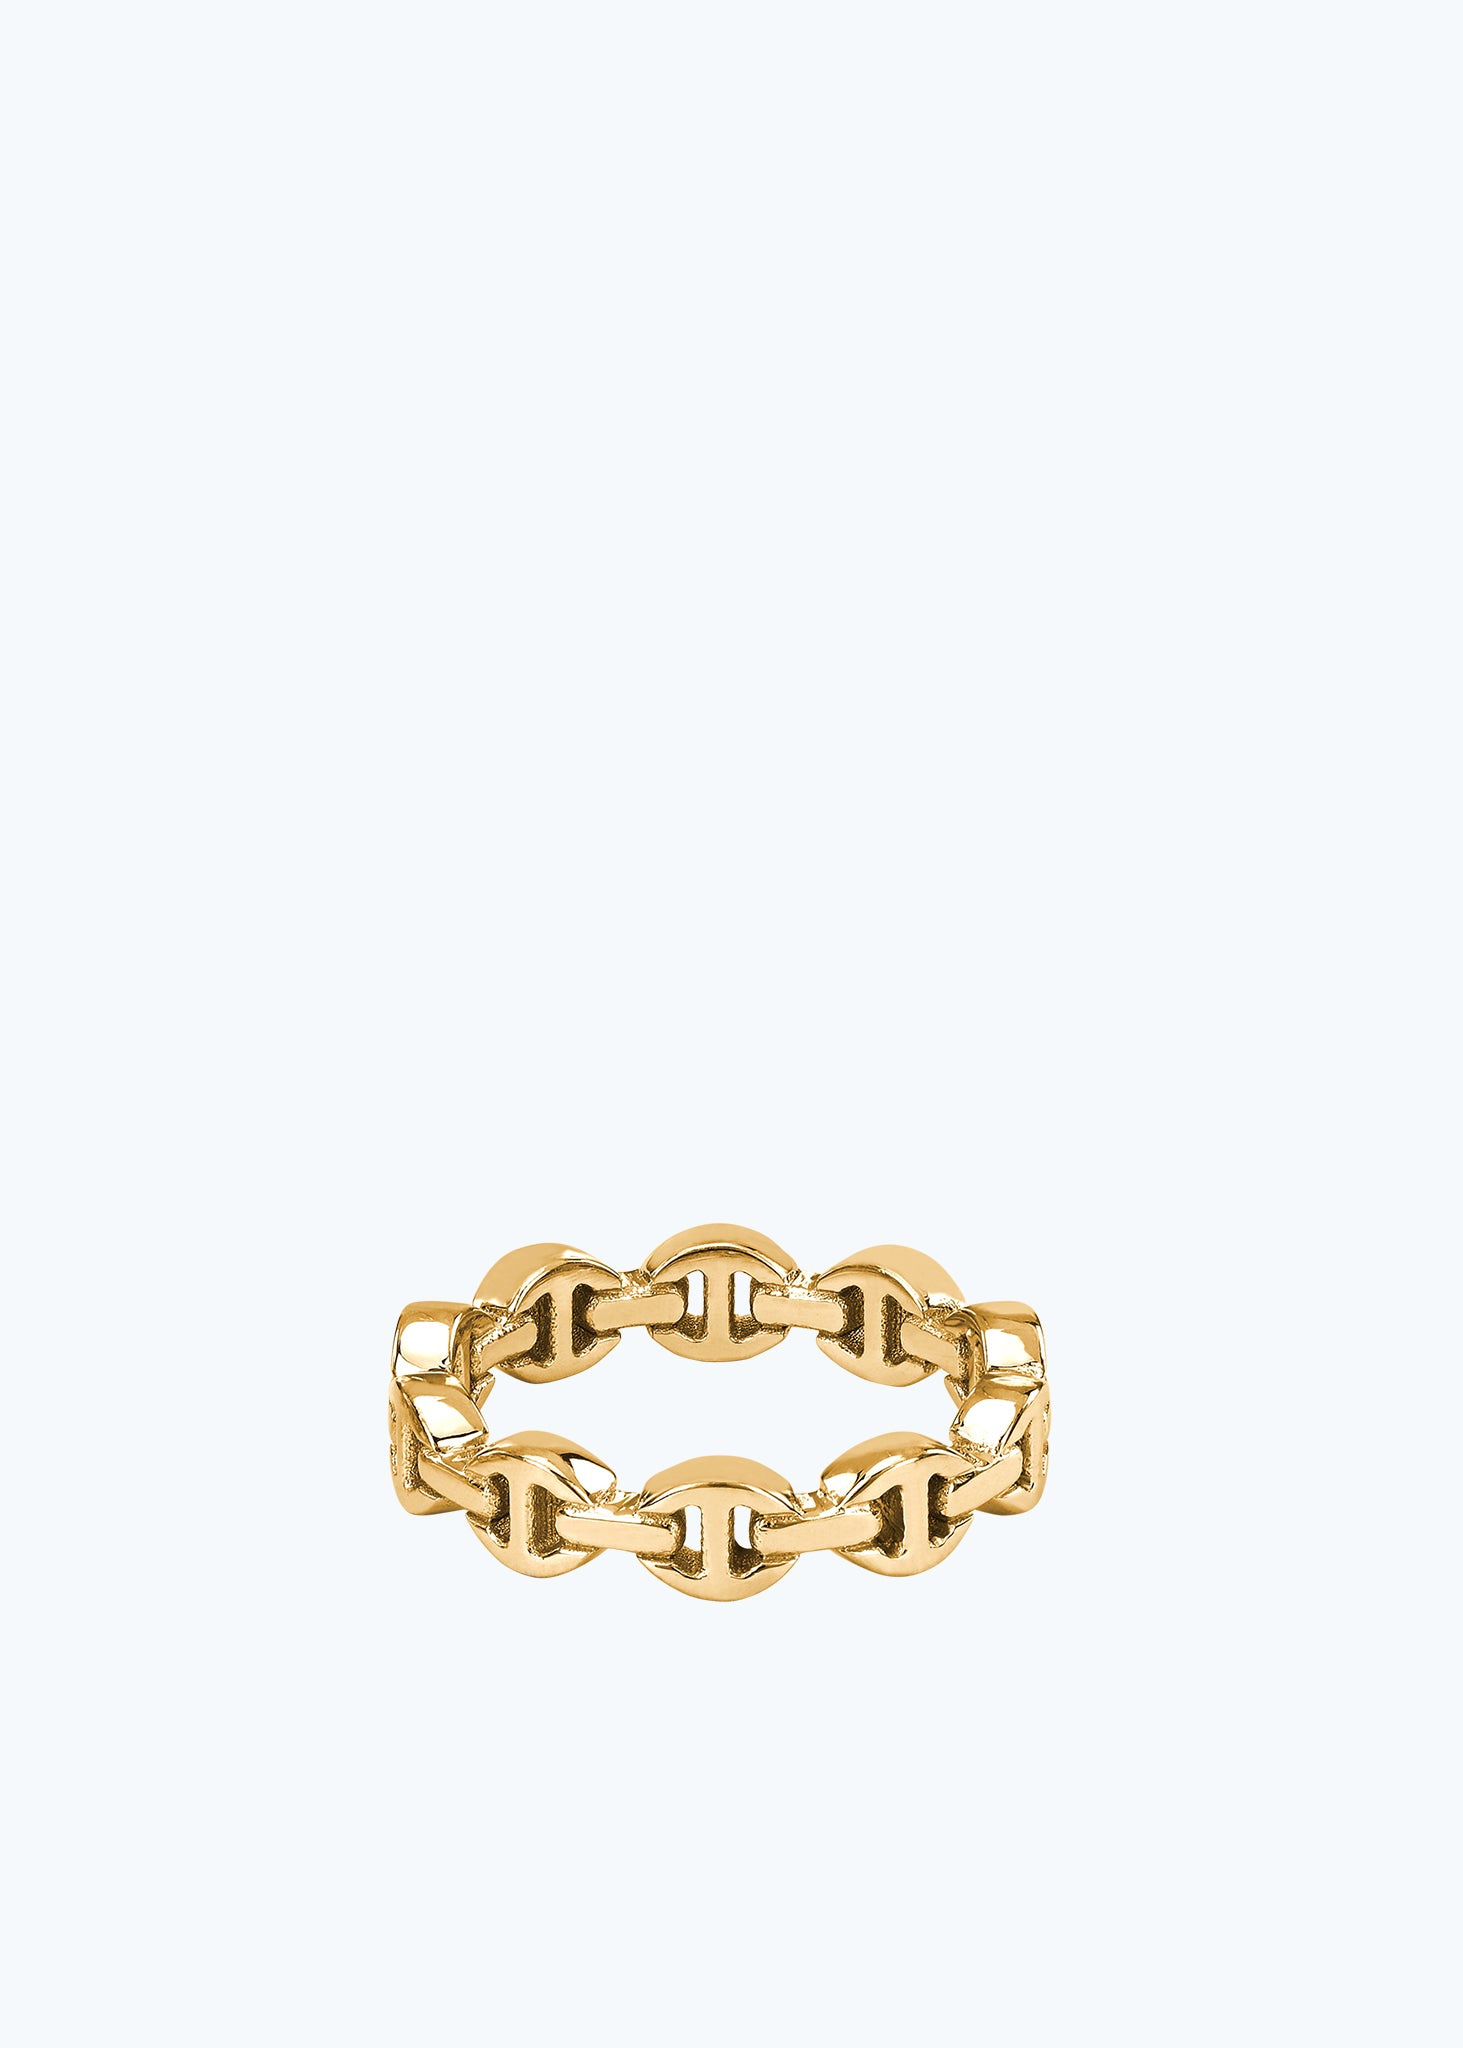 Micro Dame Tri- Link lll Ring in Yellow Gold